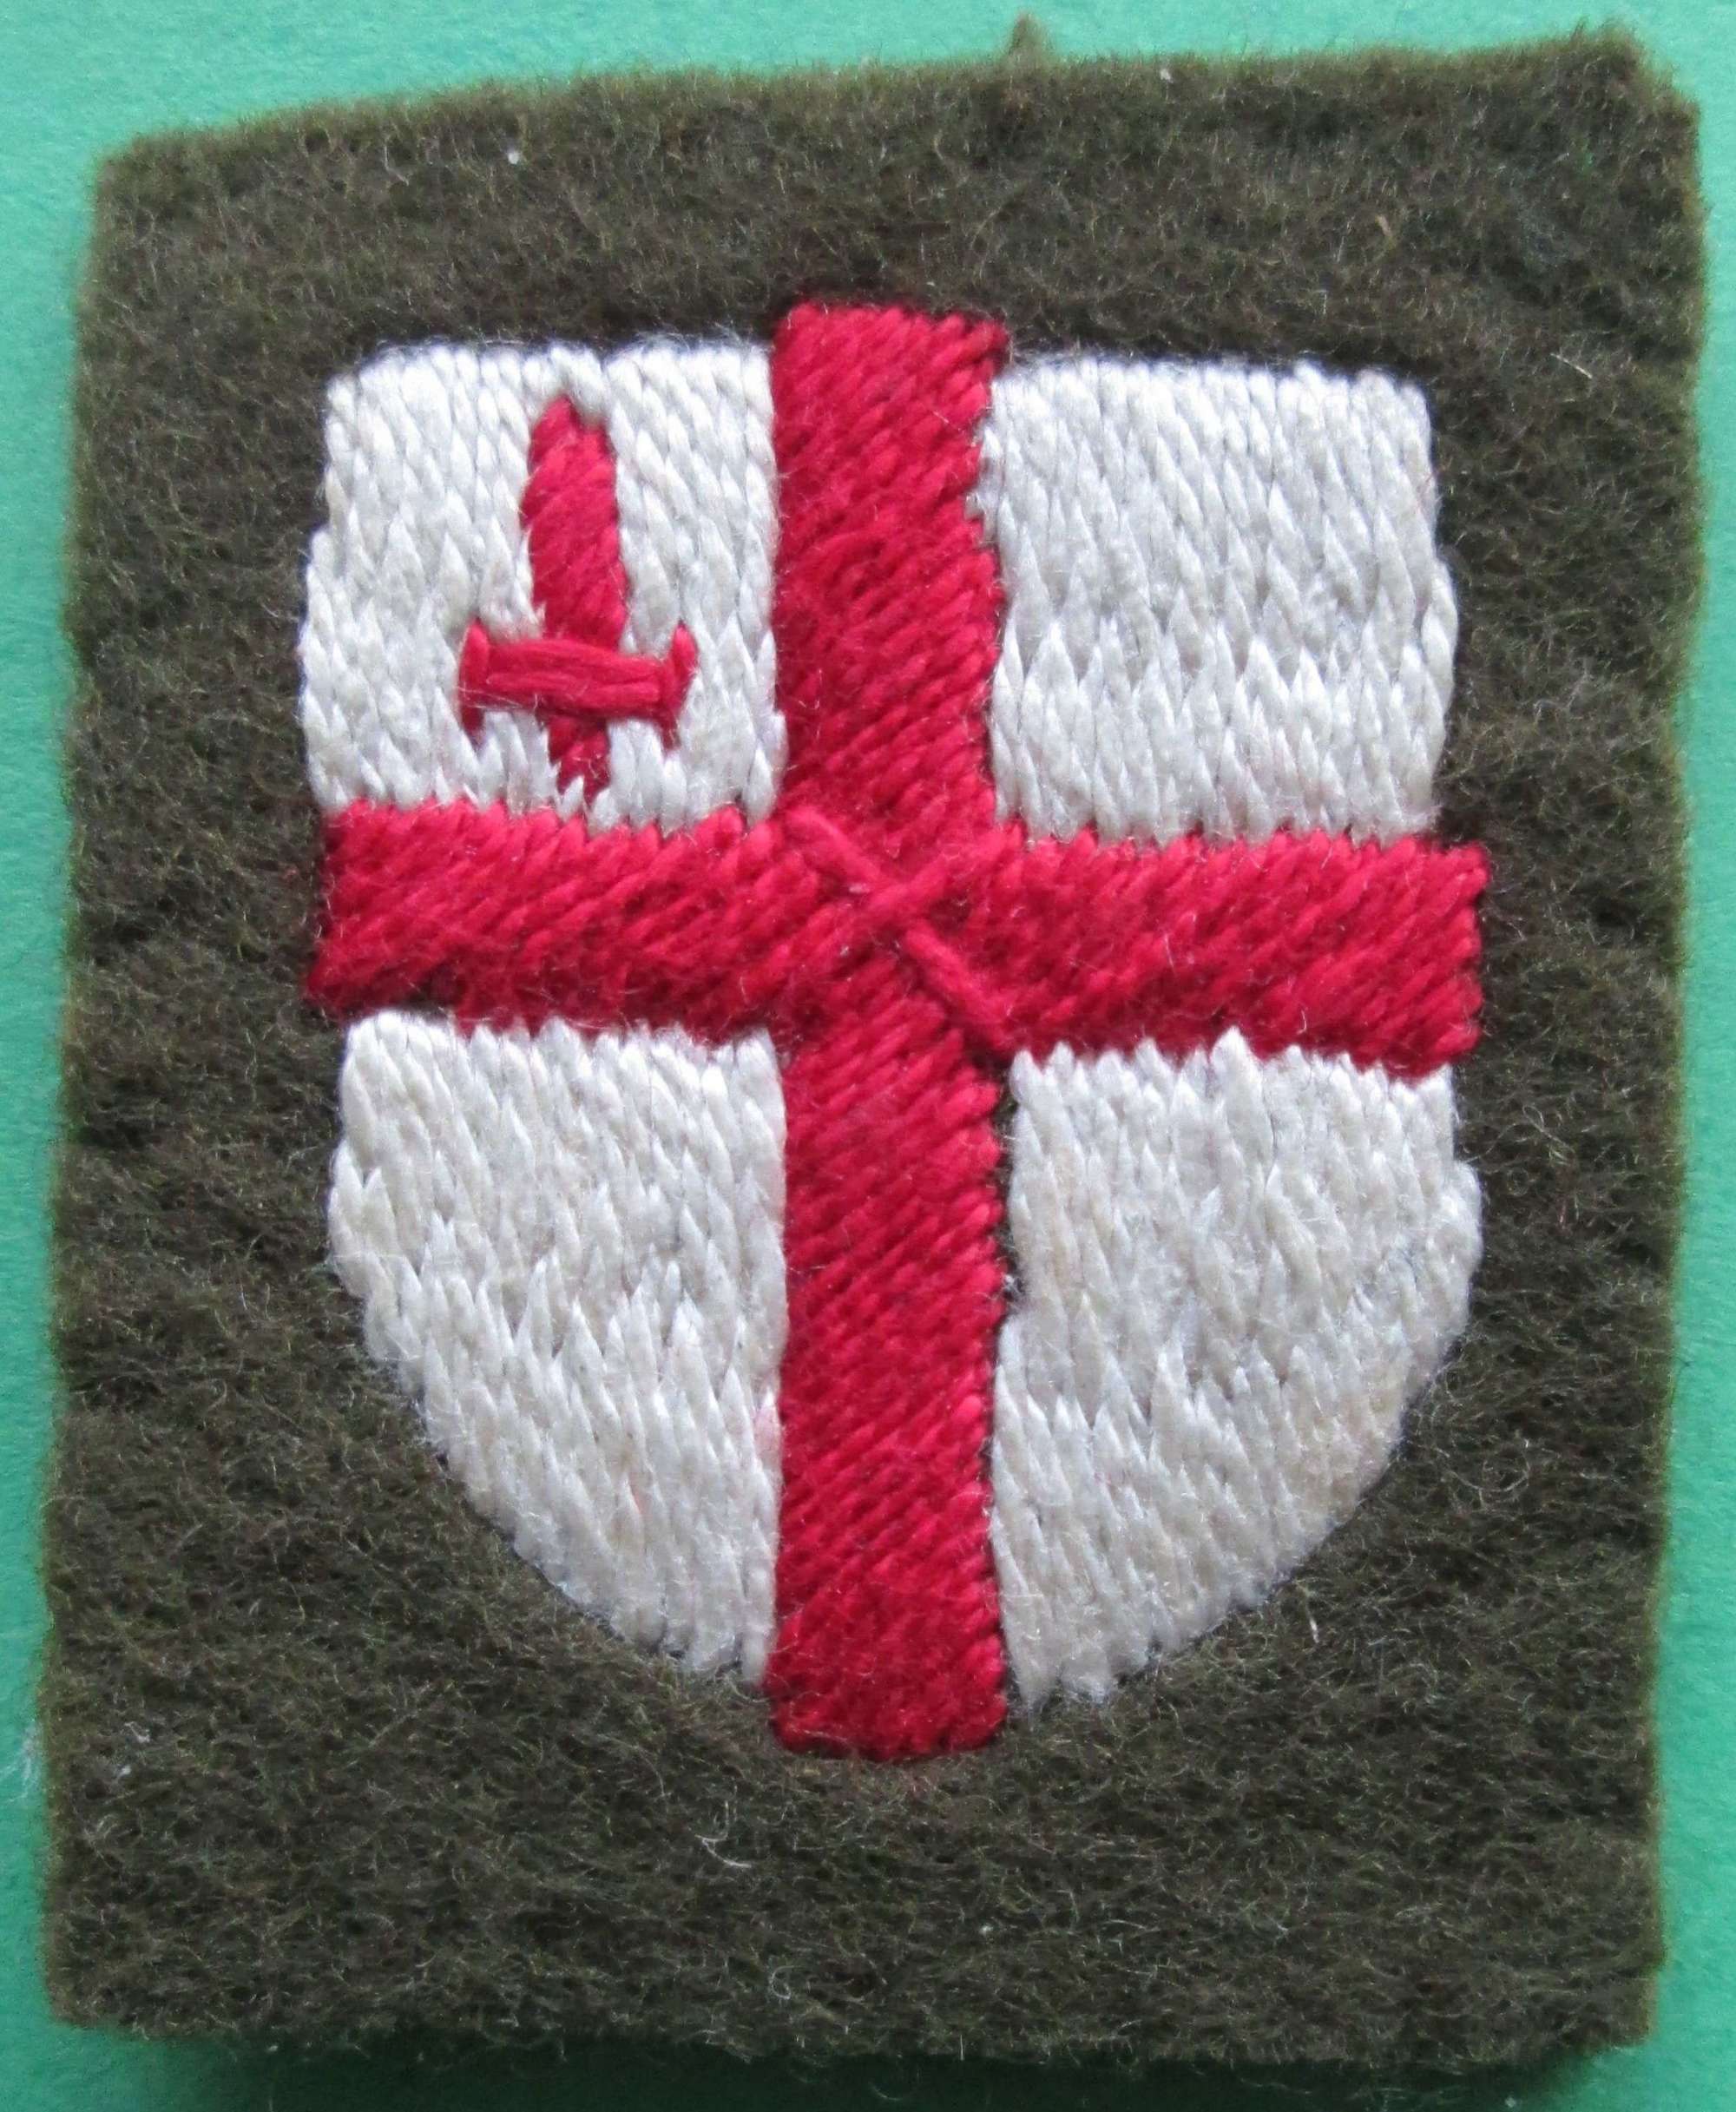 A City of London army cadet force patch